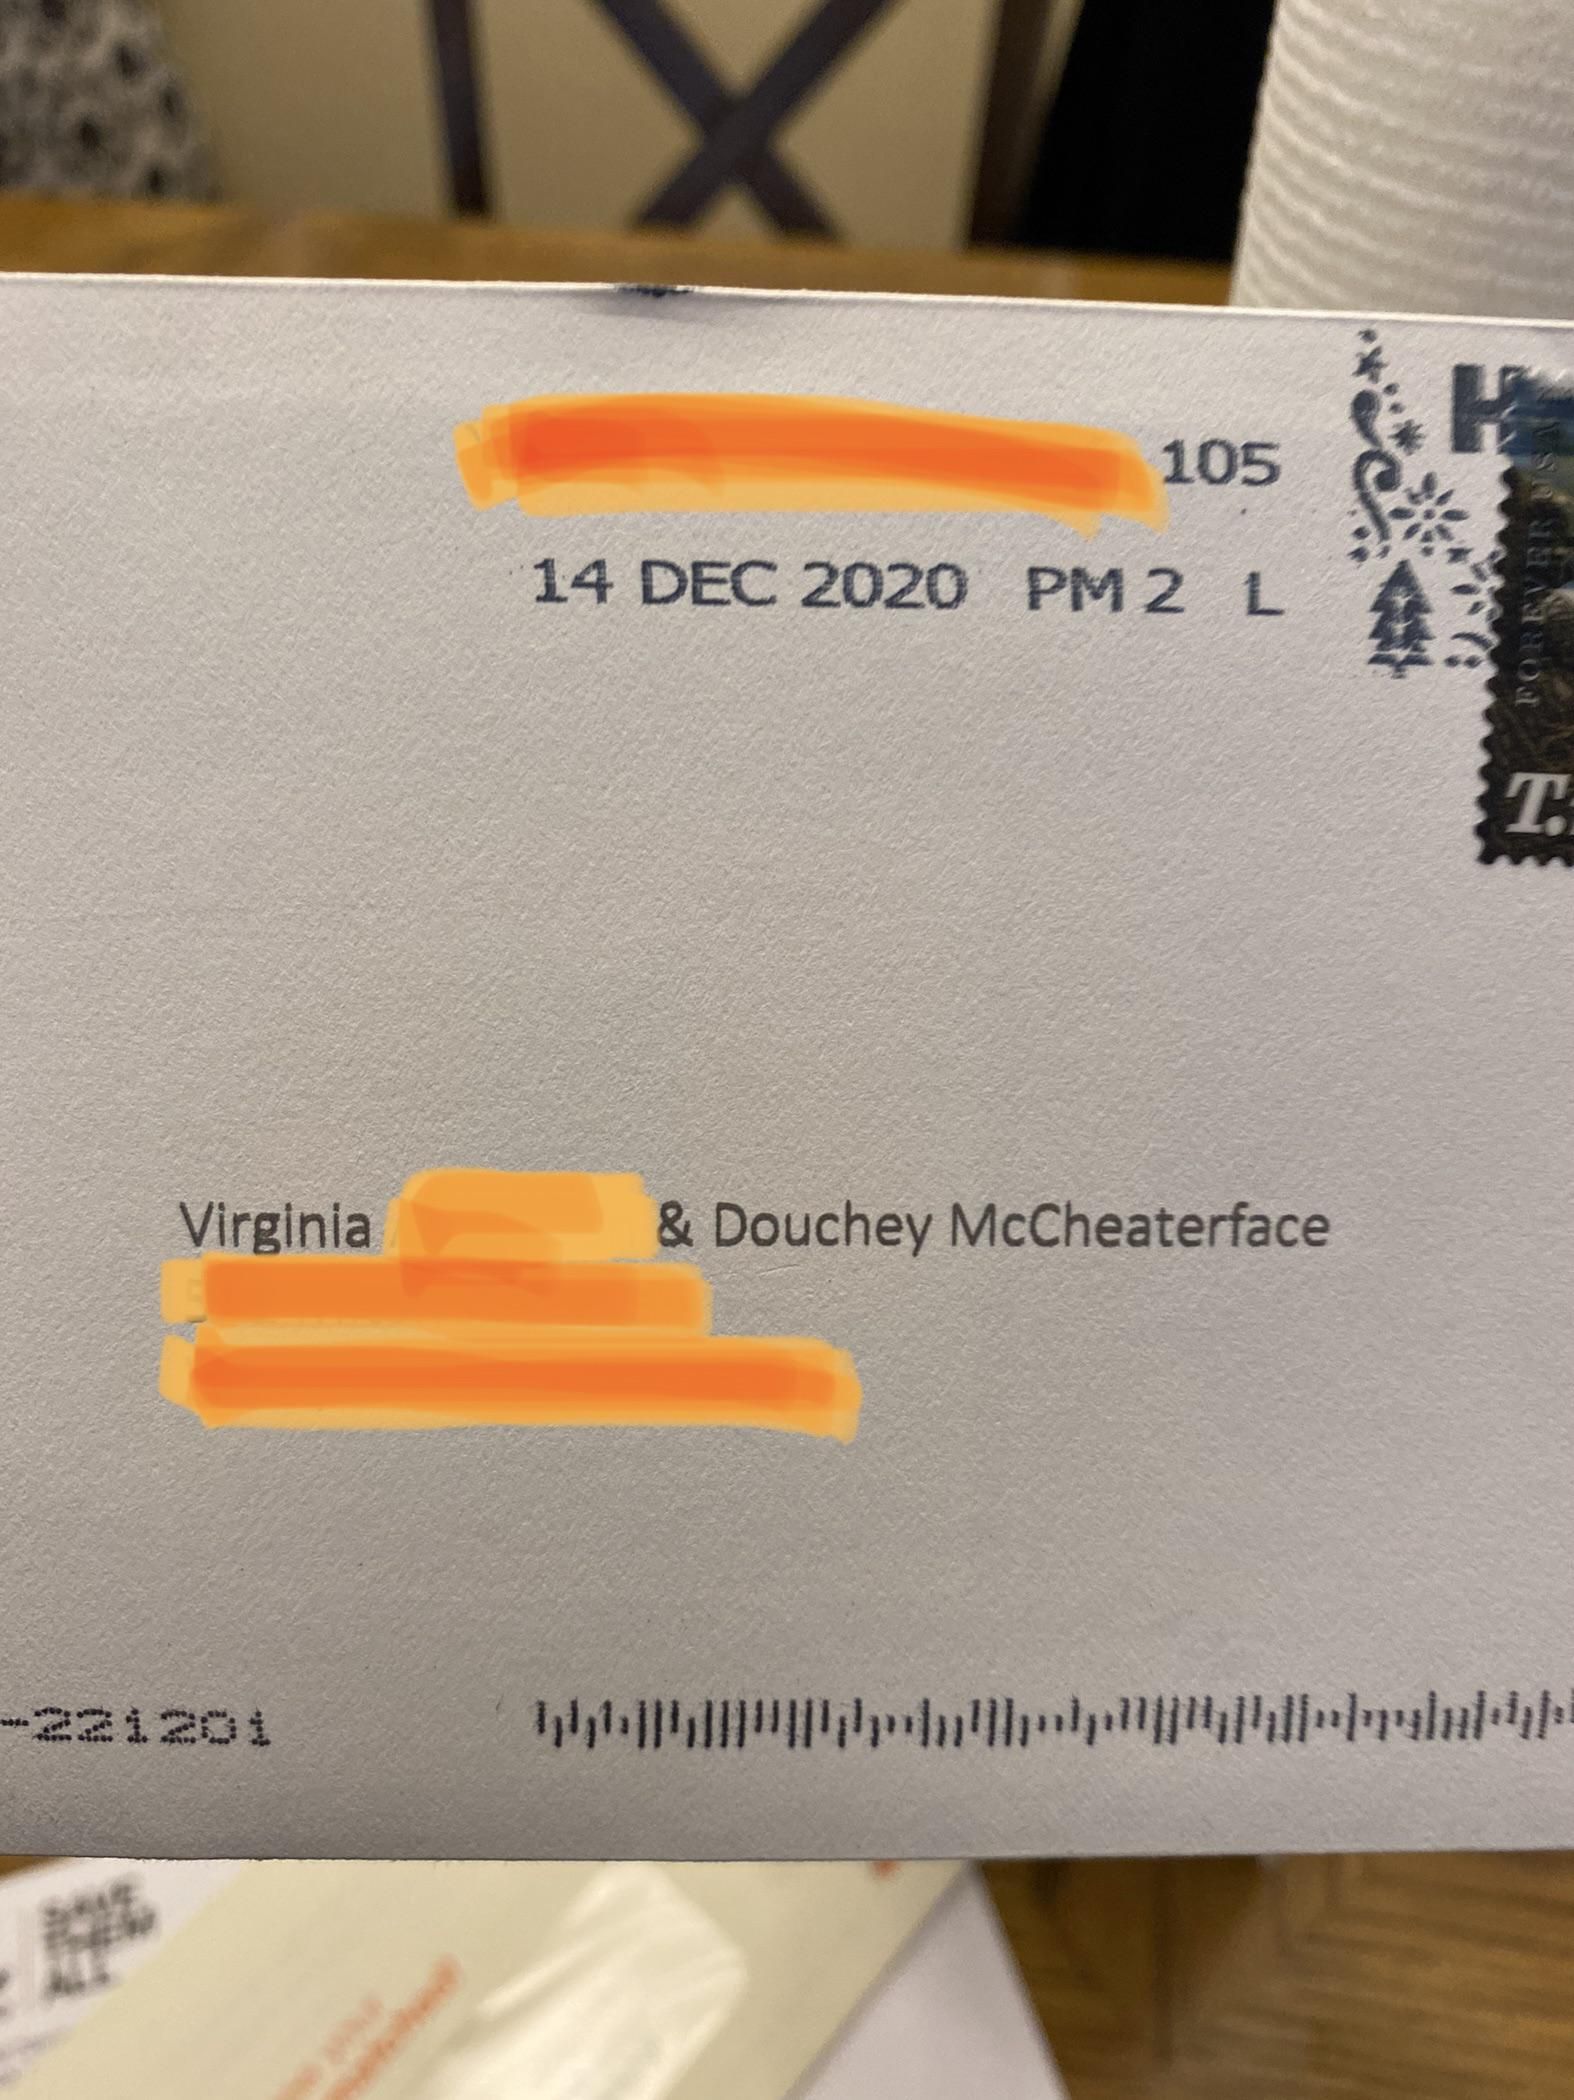 Sometimes I receive mail addressed to my ex-husband.